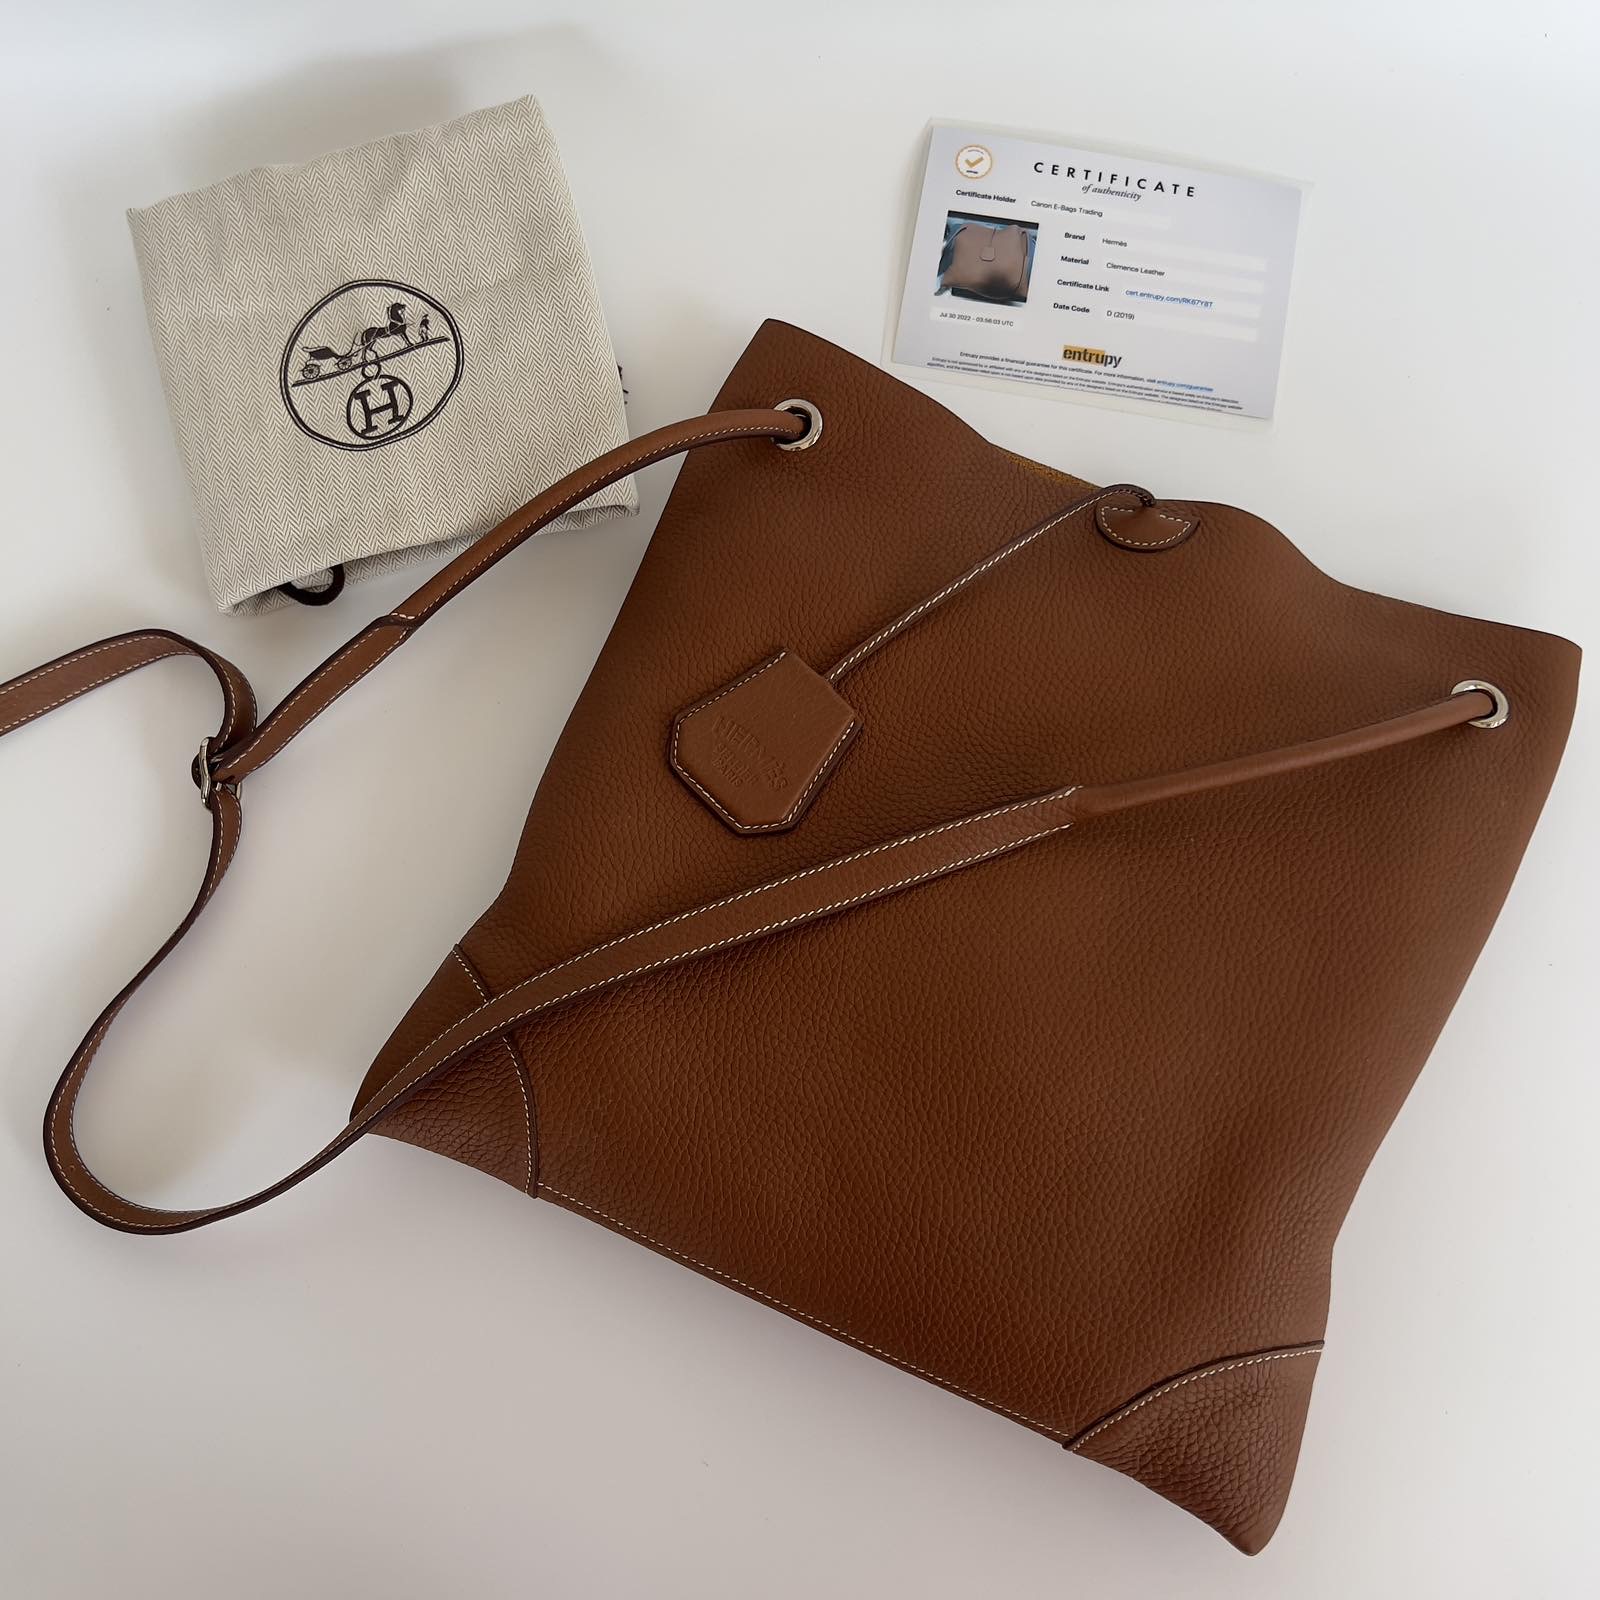 Hermes Silky City Clemence Leather Shoulder Bag. Made in France.With  Certificate of Authentication From ENTRUPY.